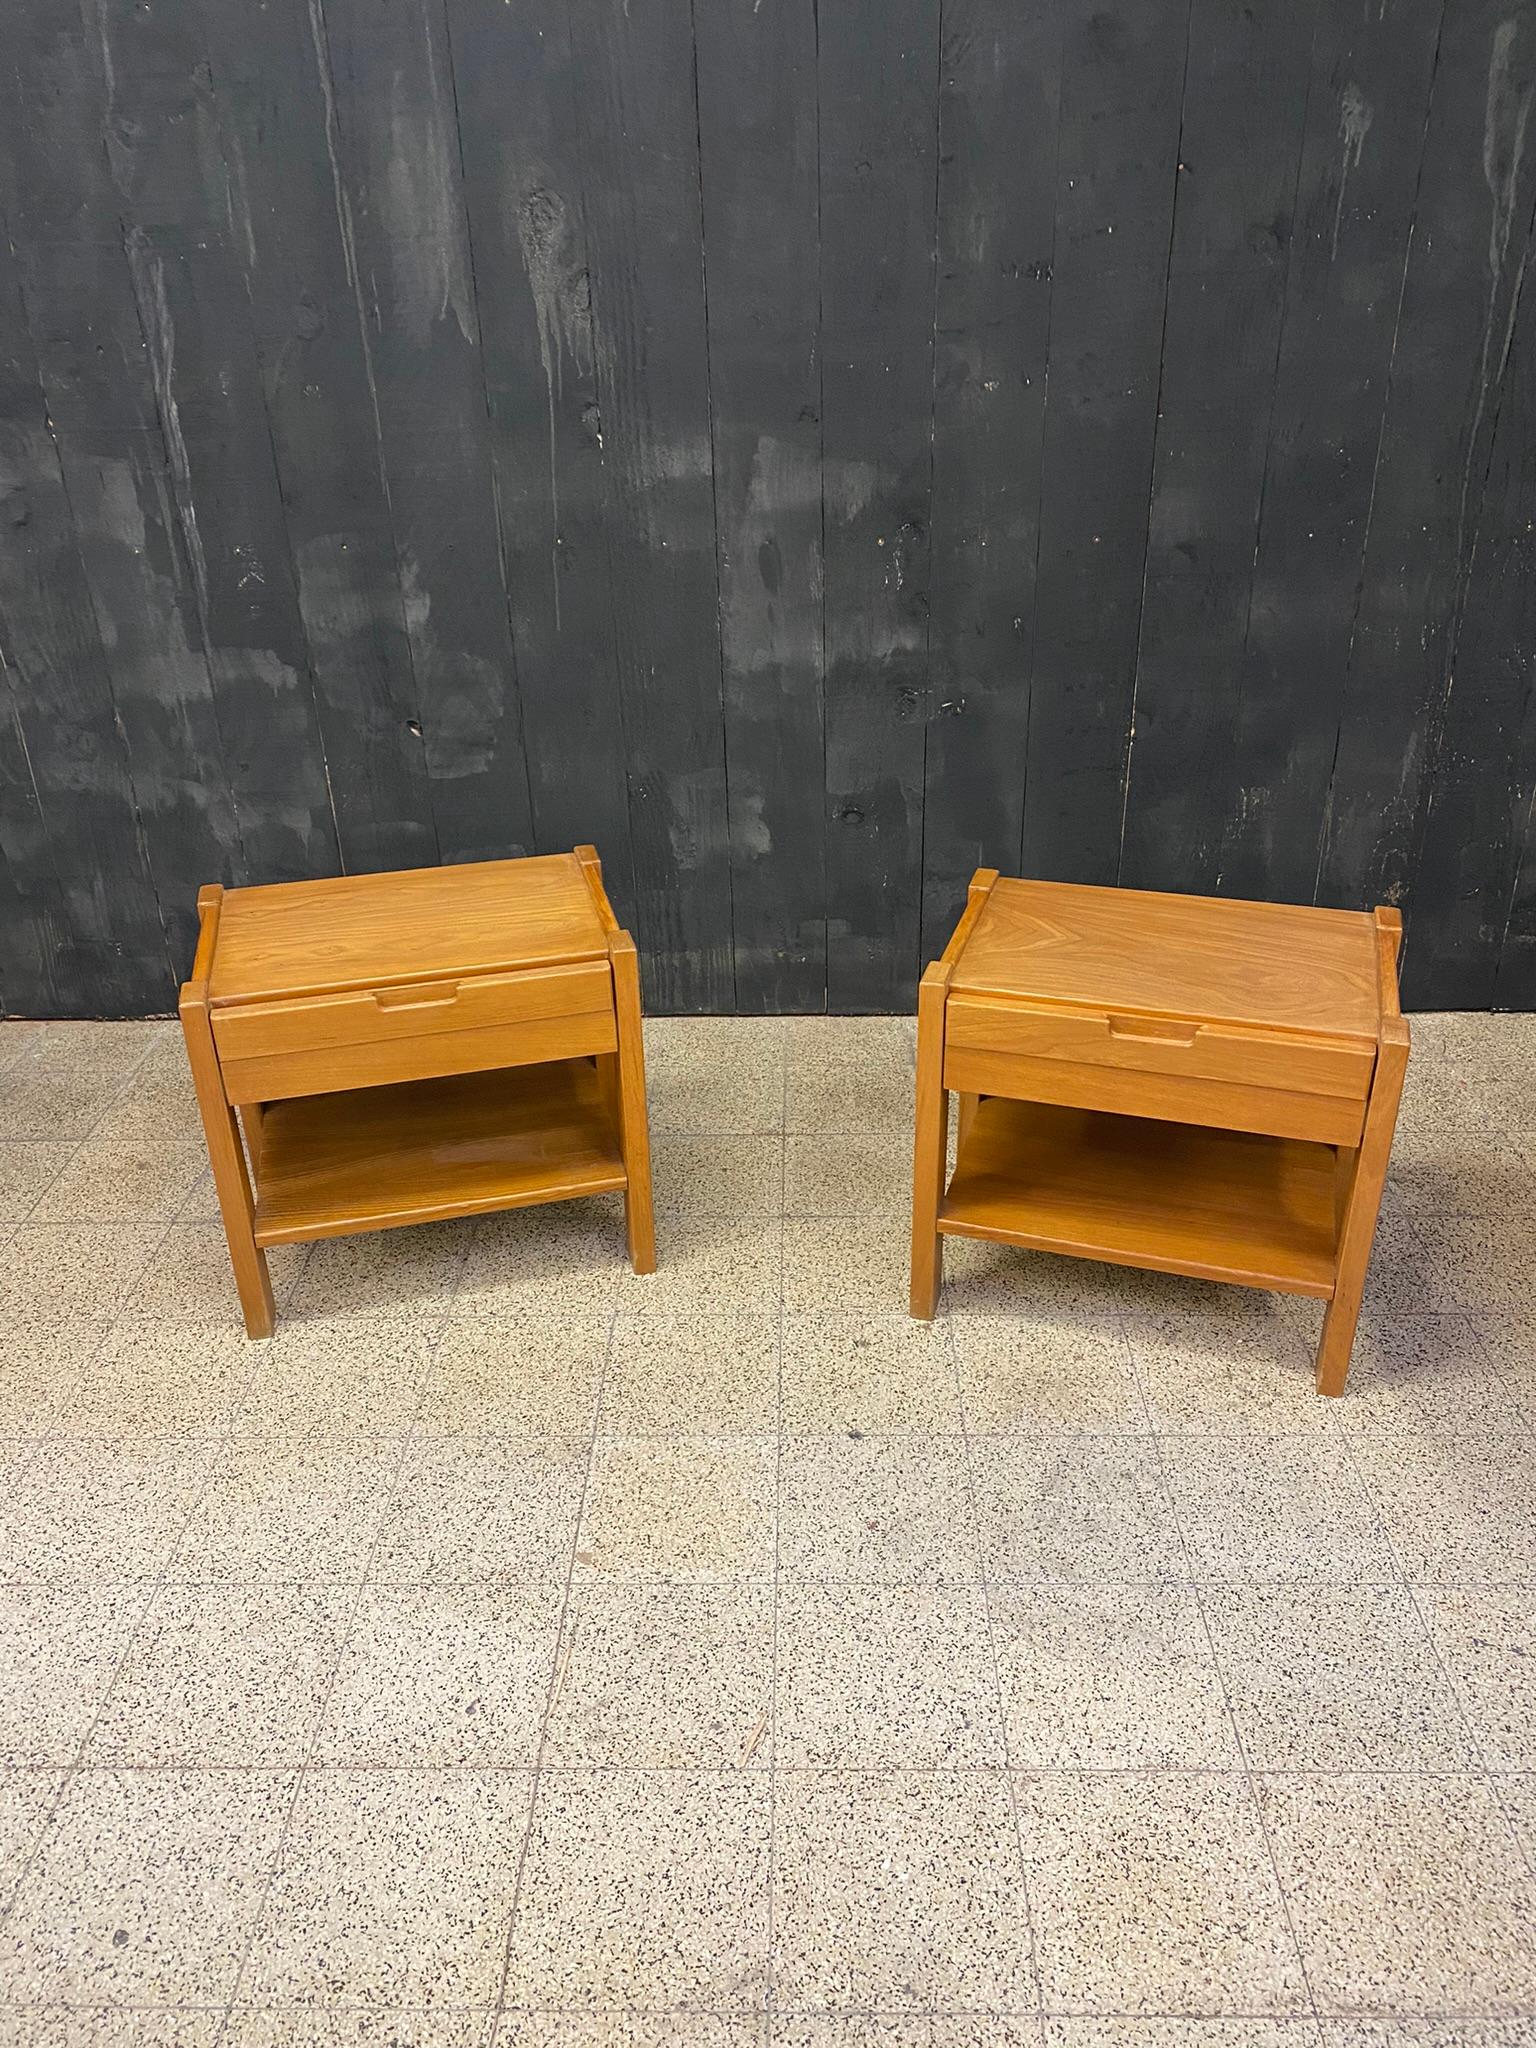 Maison Regain two Bedside Tables in Solid Elm, circa 1960 Pierre Chapo Style For Sale 2